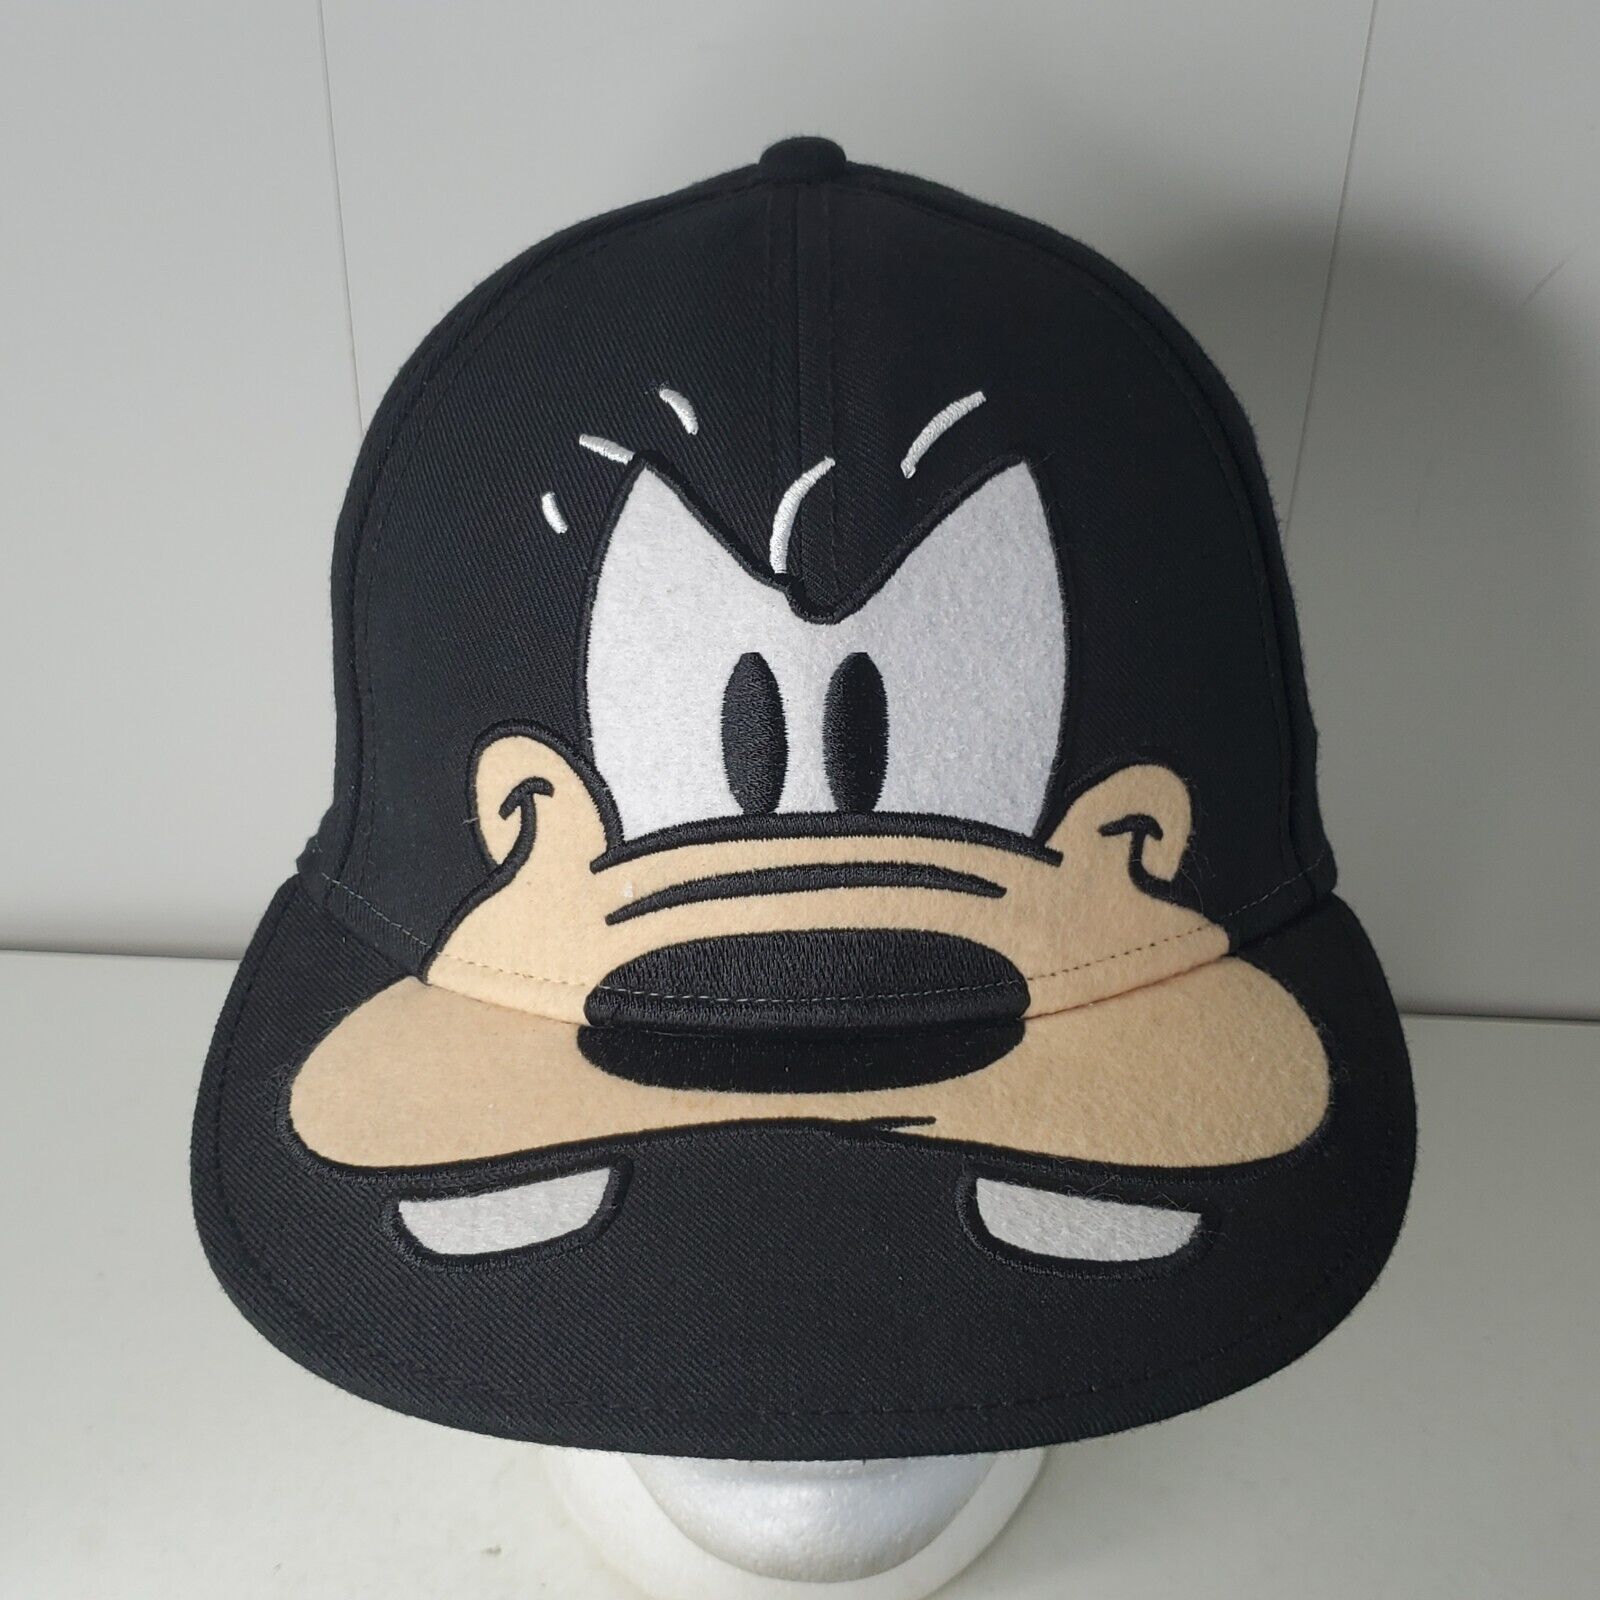 VTG 1928 for Disney Goofy Embroidered Wool Hat Baseball Cap Fitted Size 7 1/4